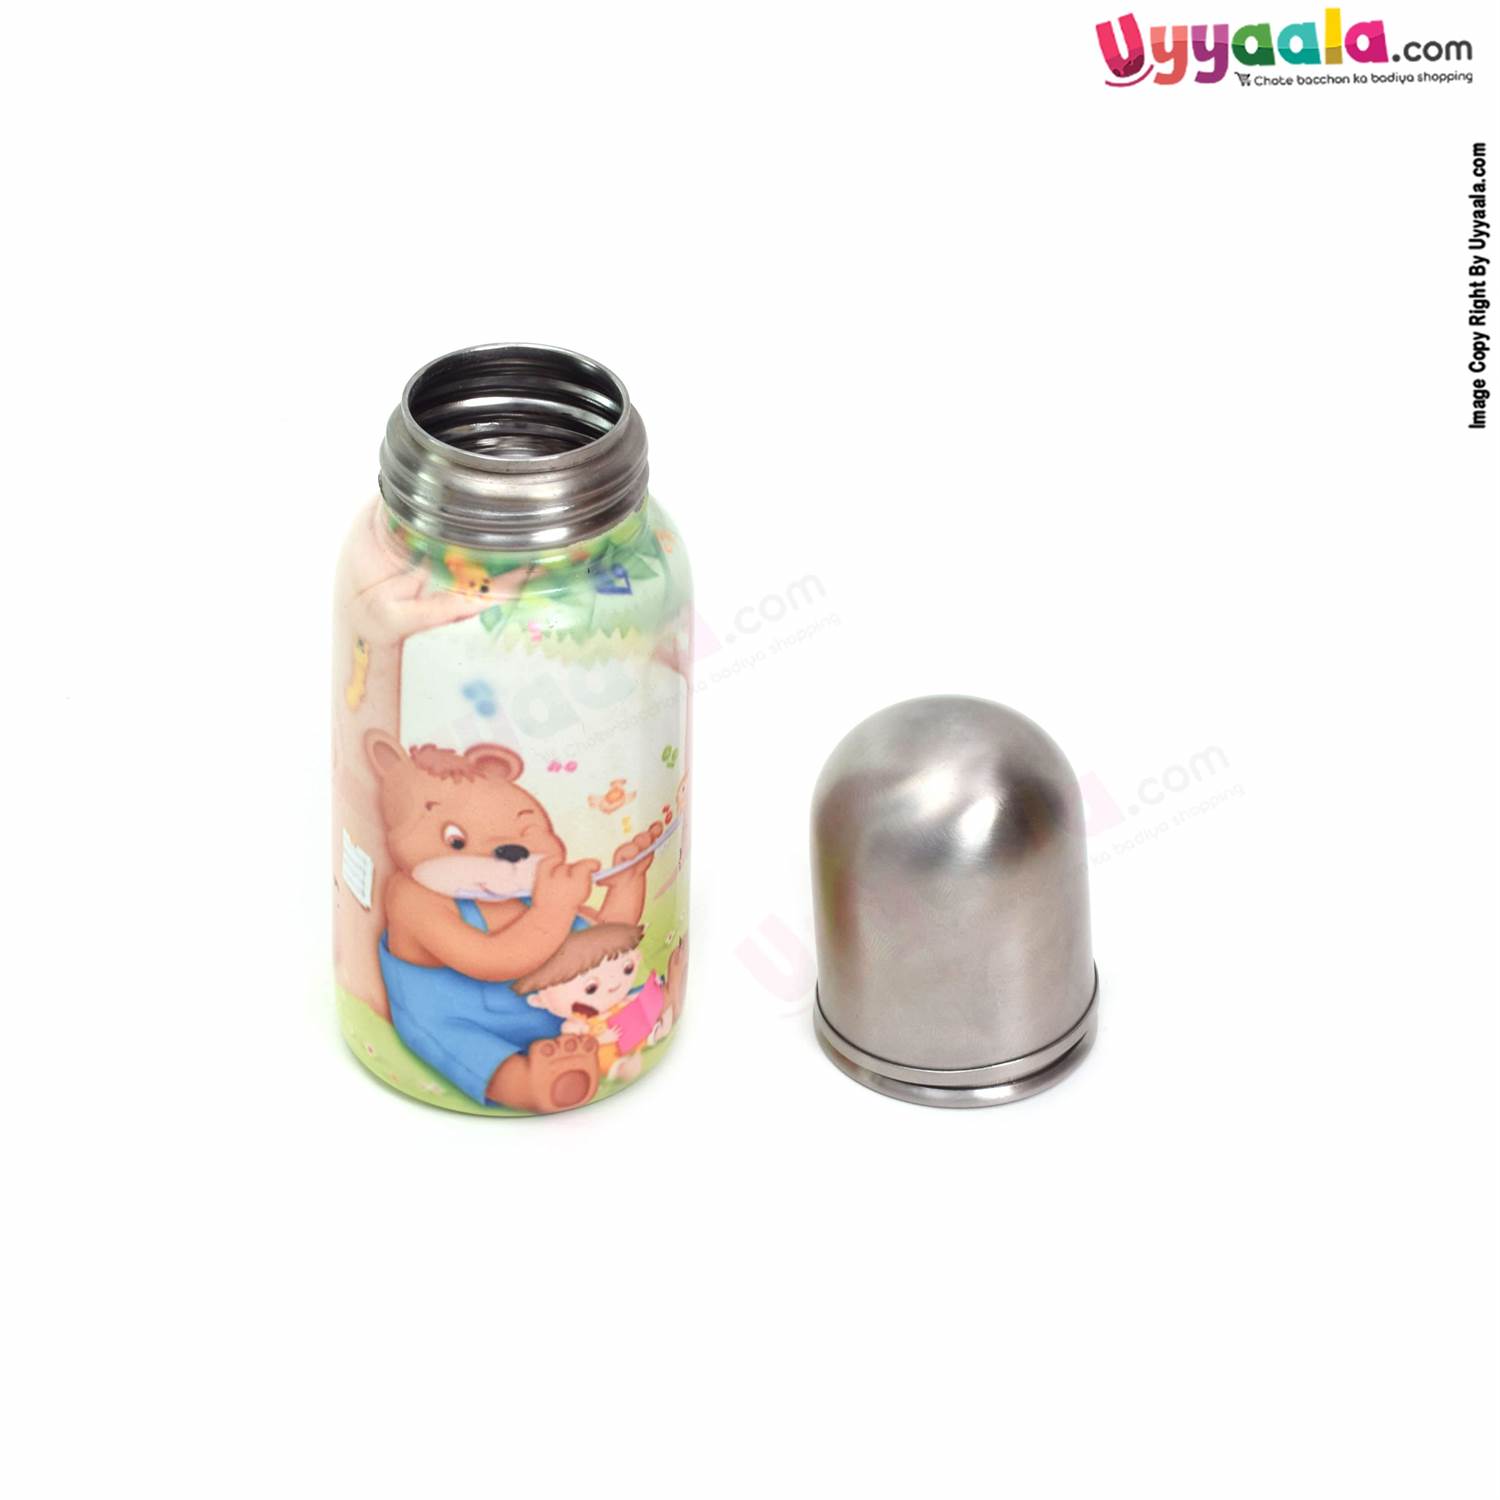 Stainless Steel Baby Feeding Bottle With Bear and Baby Print 220ml - Multicolor